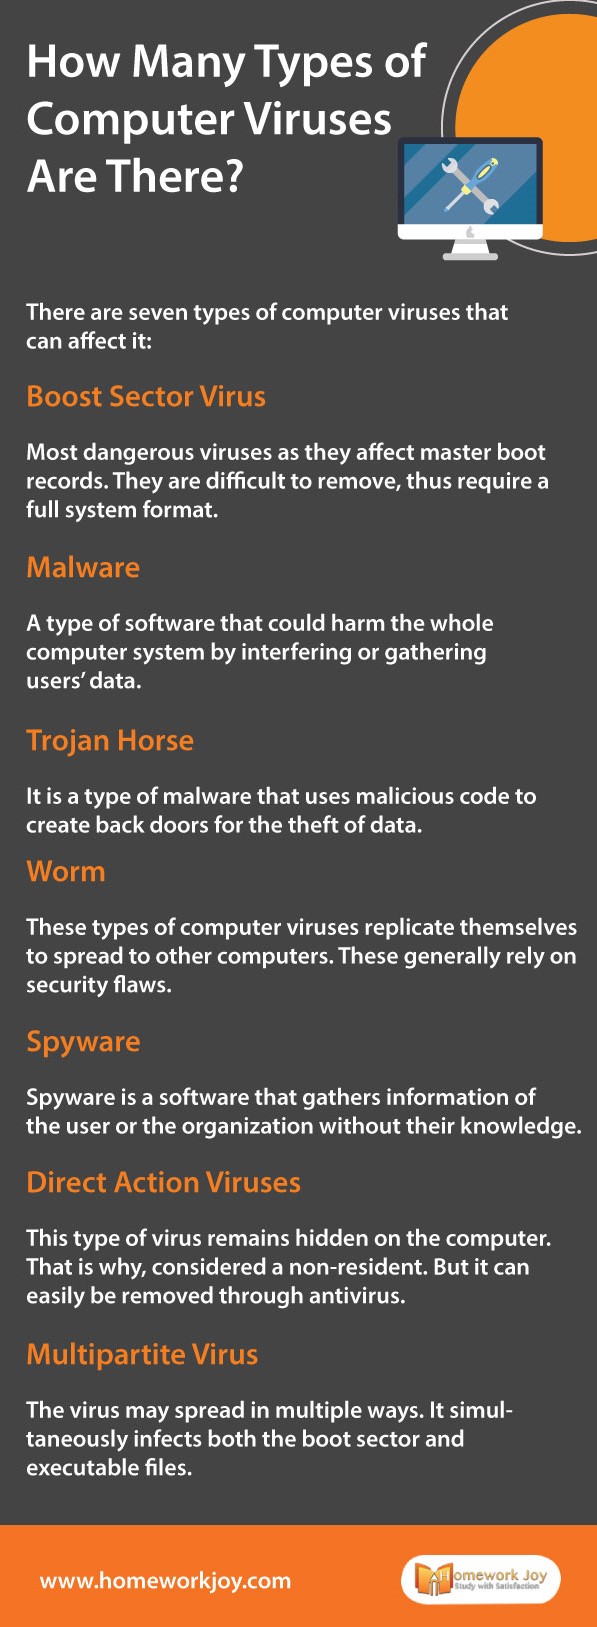 How Many Types of Computer Viruses Are There